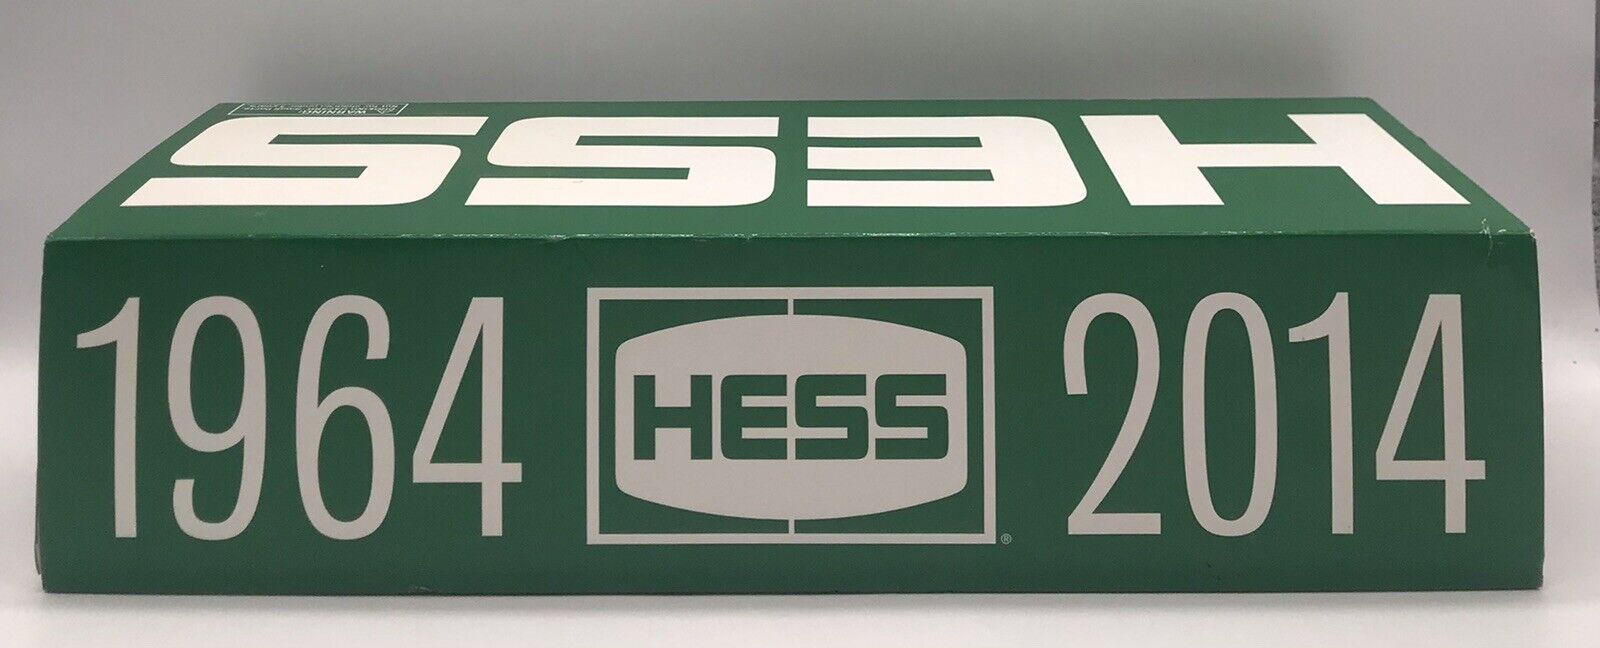 Hess Toy Tanker Truck 2014 50th Anniversary Special Collector's Edition NRFB NEW